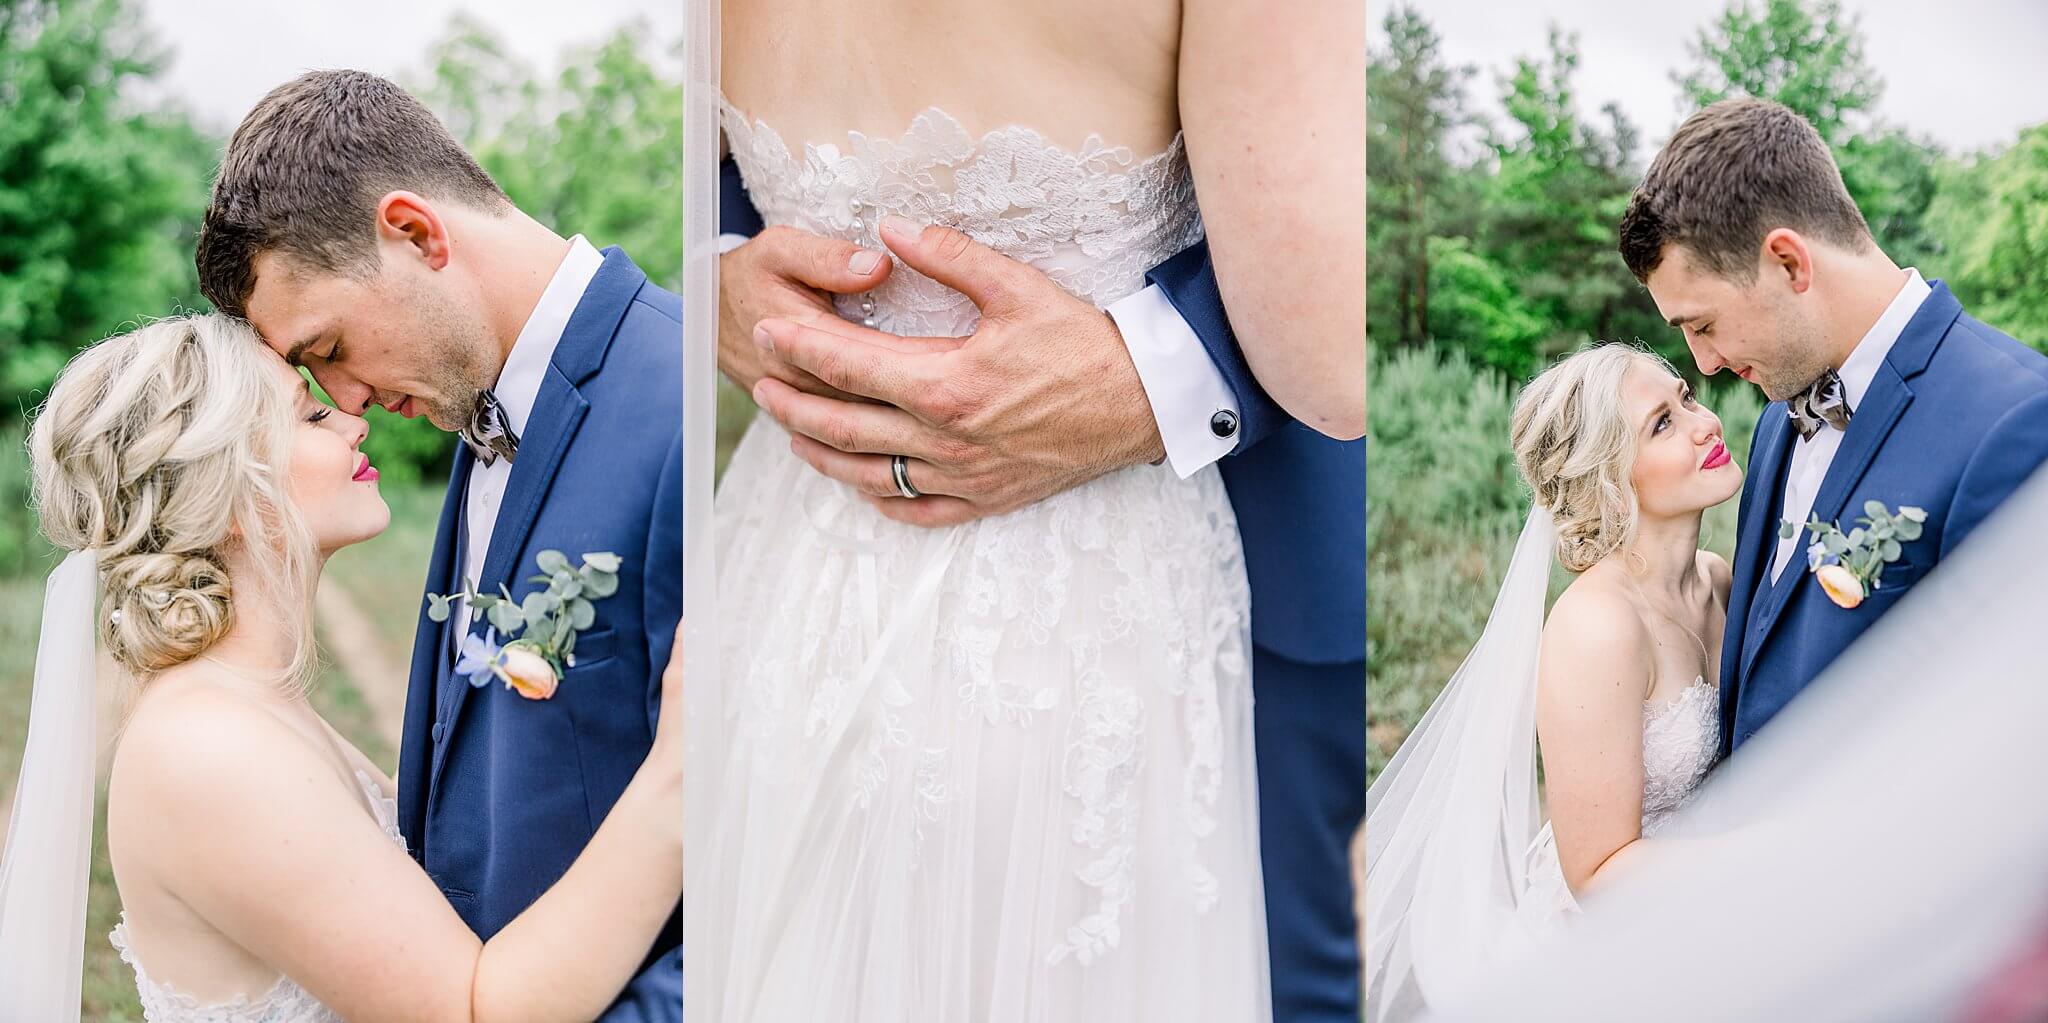 A collage of bride and groom portraits taken during their Traverse City wedding.